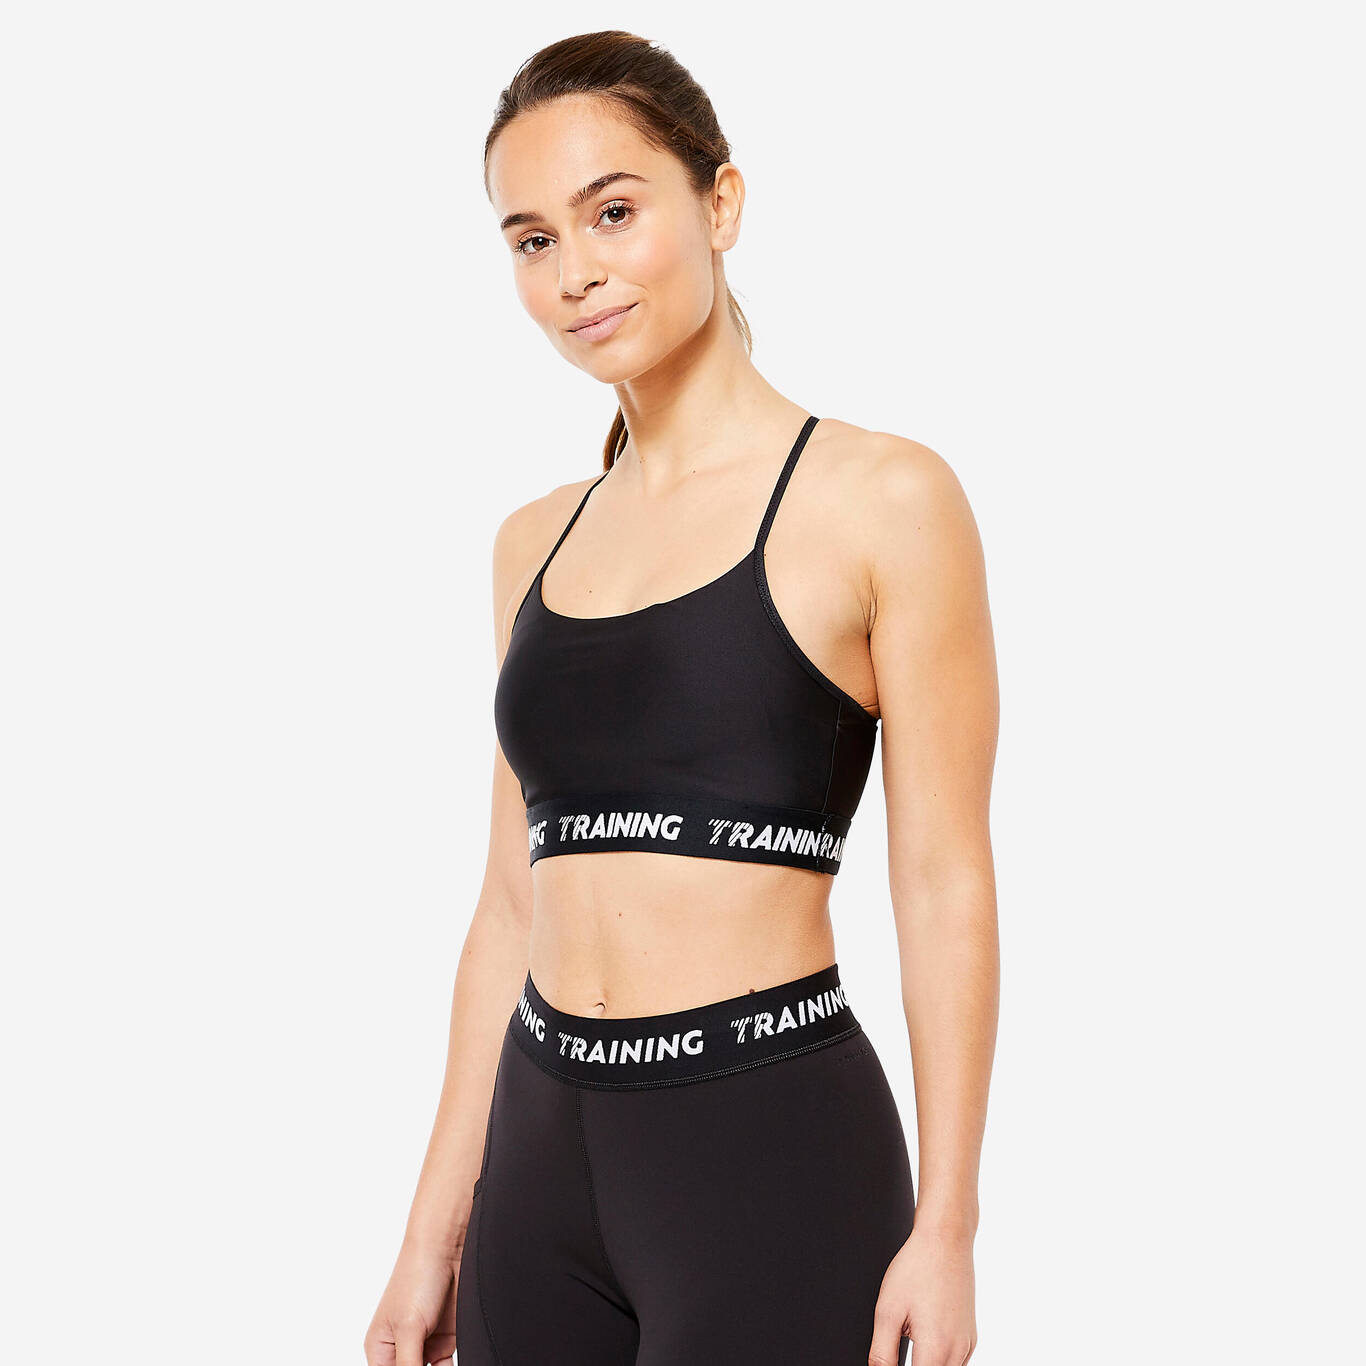 Women's Medium Support Racer Back Sports Bra with Cups - Black/Grey